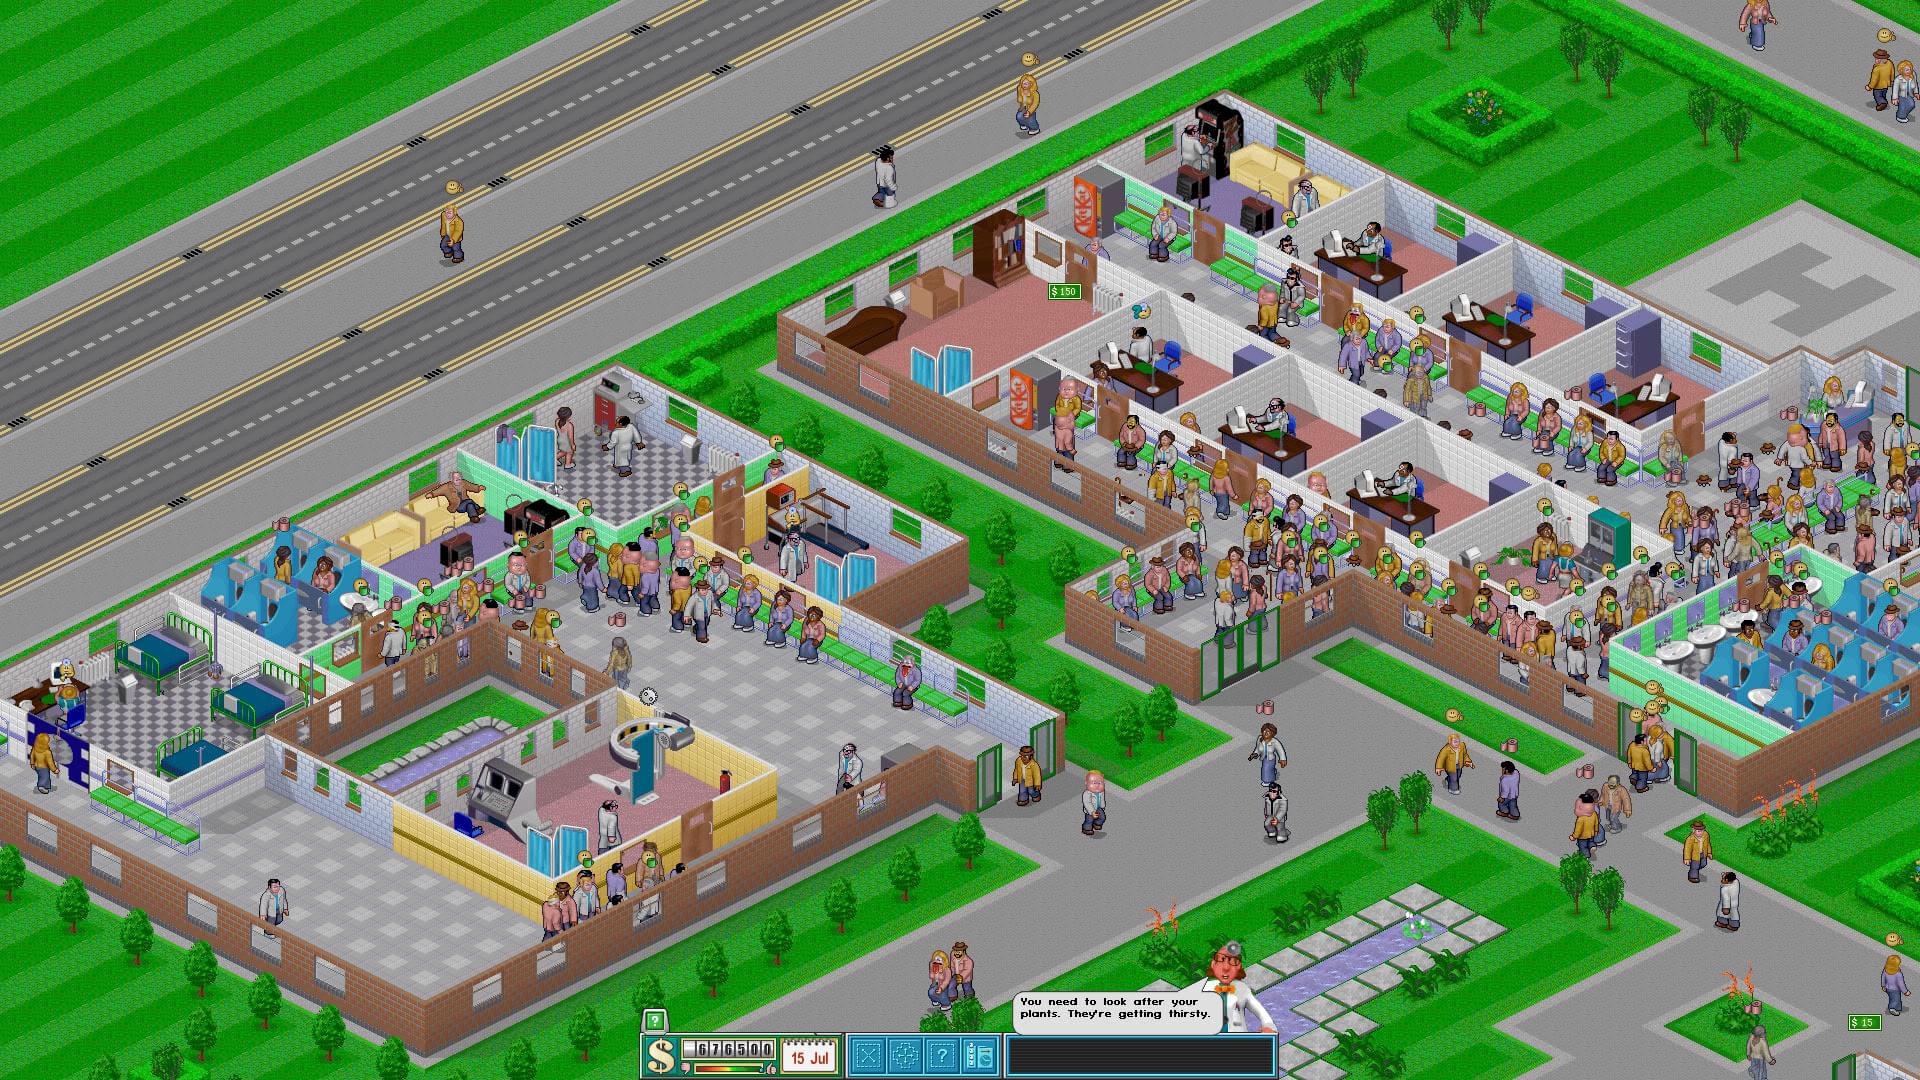 download theme hospital for windows